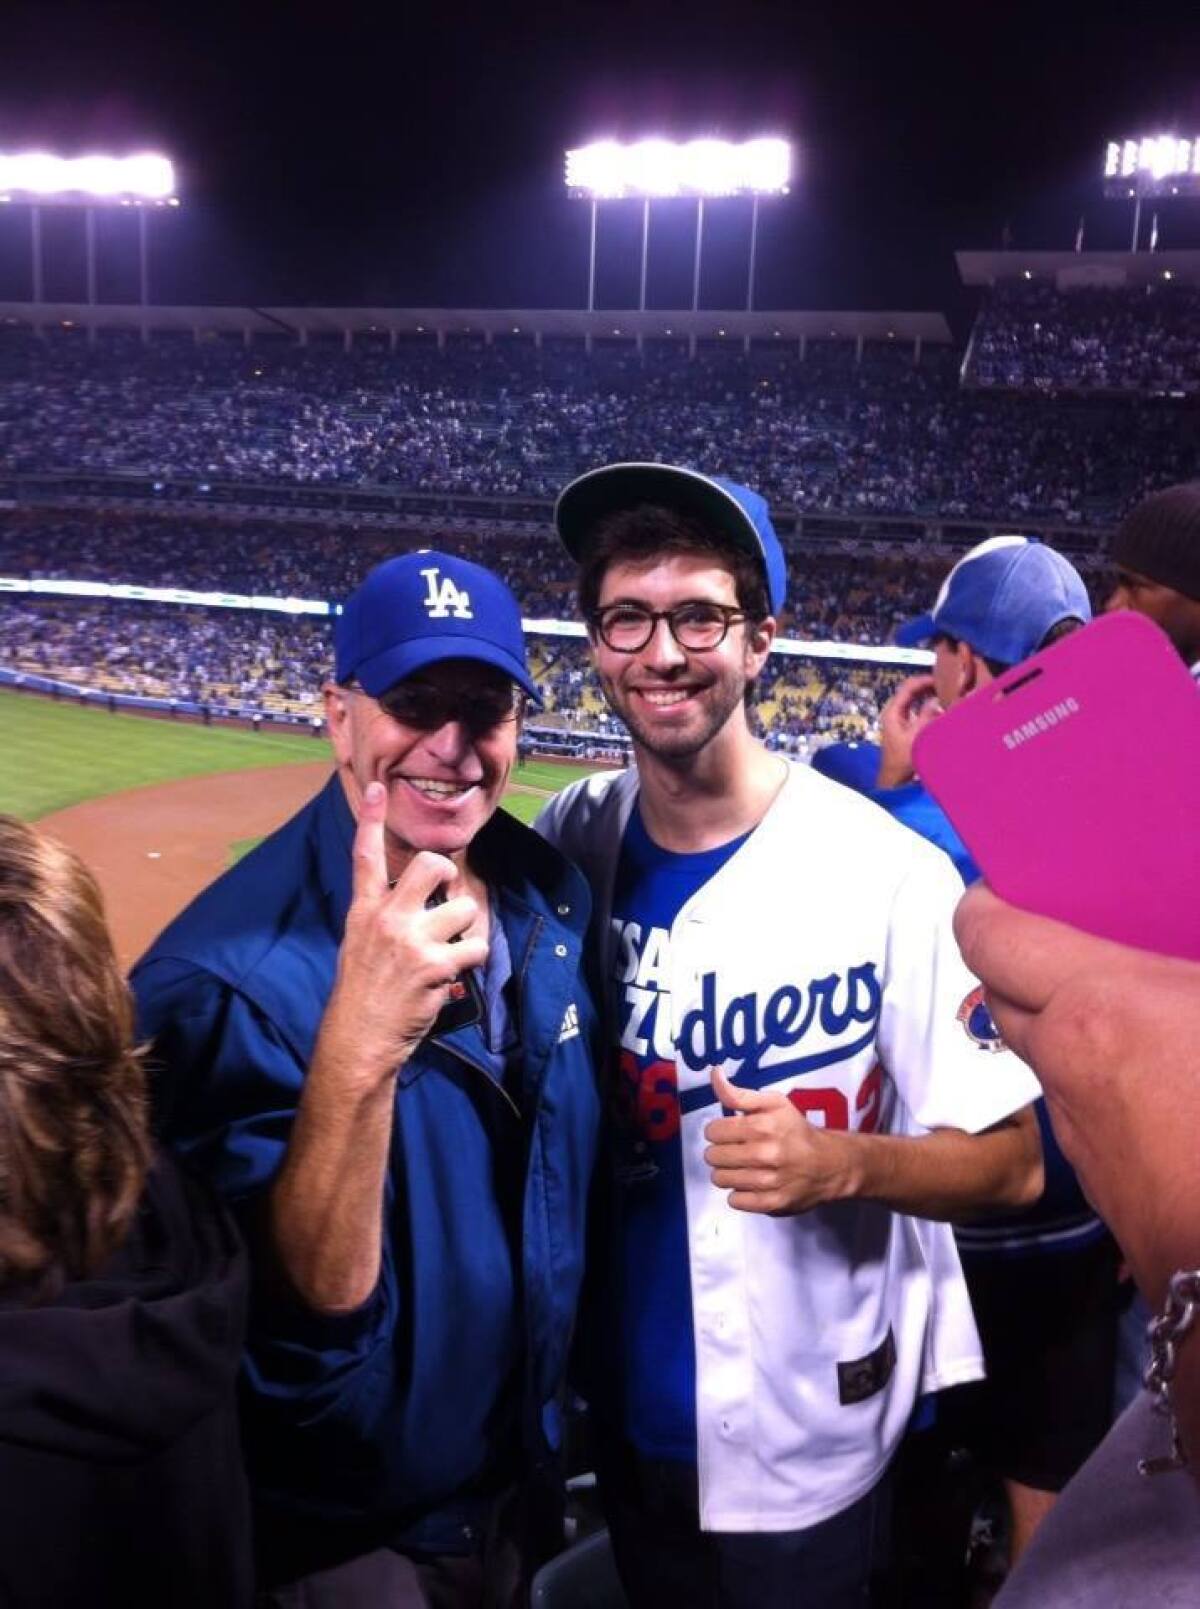 Julian Rubel smiles with his father at a Dodgers game in 2013.